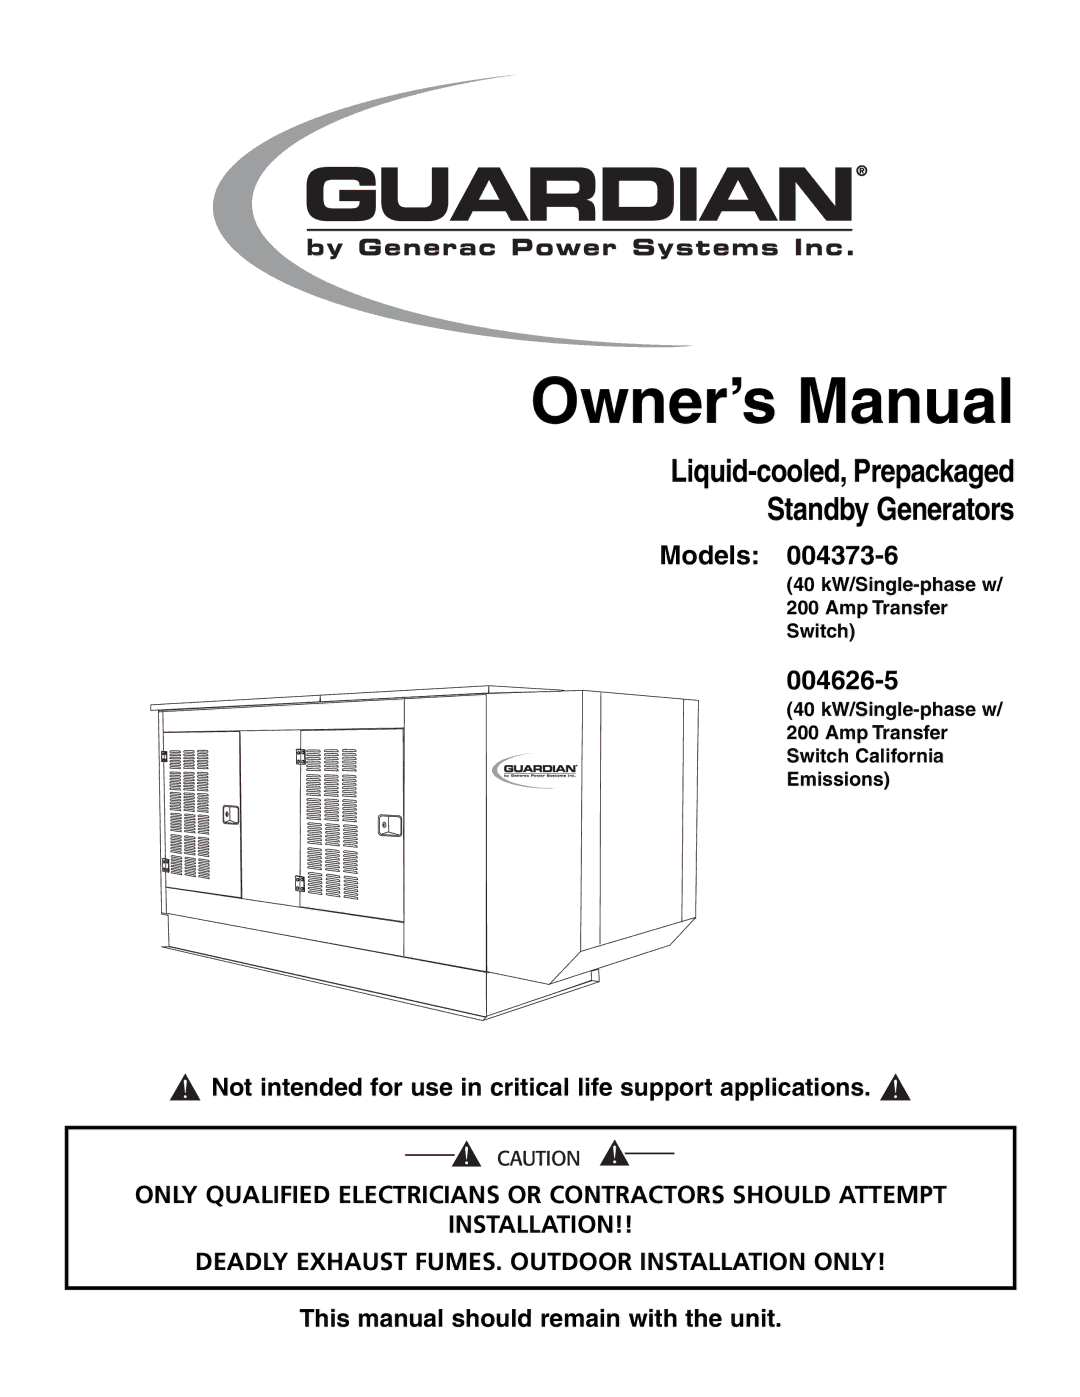 Generac Power Systems 004373-6, 004626-5 owner manual Liquid-cooled, Prepackaged Standby Generators Models 